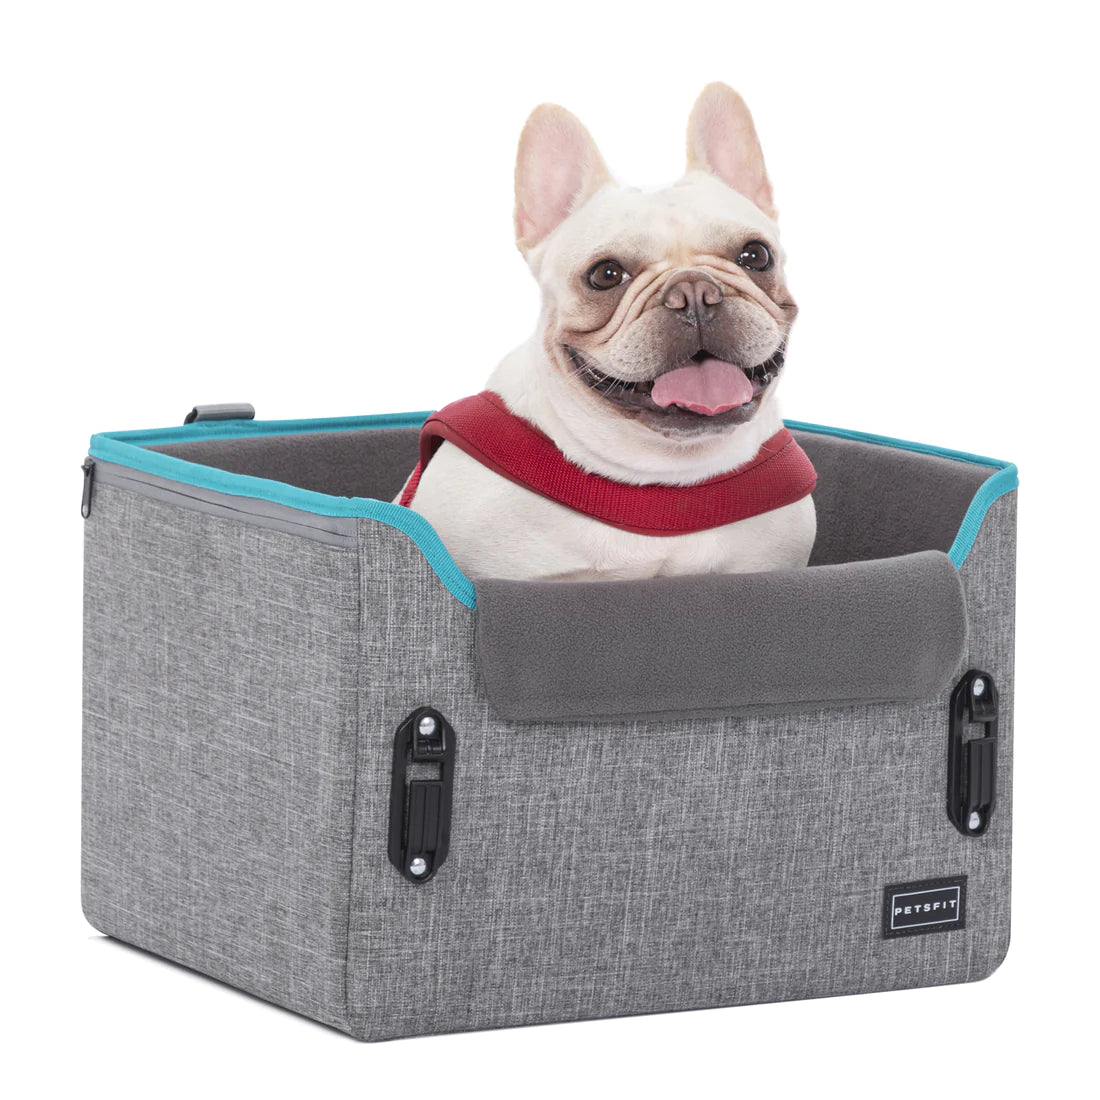 [Petsfit]Dog Car Seats for Small Dogs Puppy Stable Pet Car Seat(S-Grey)